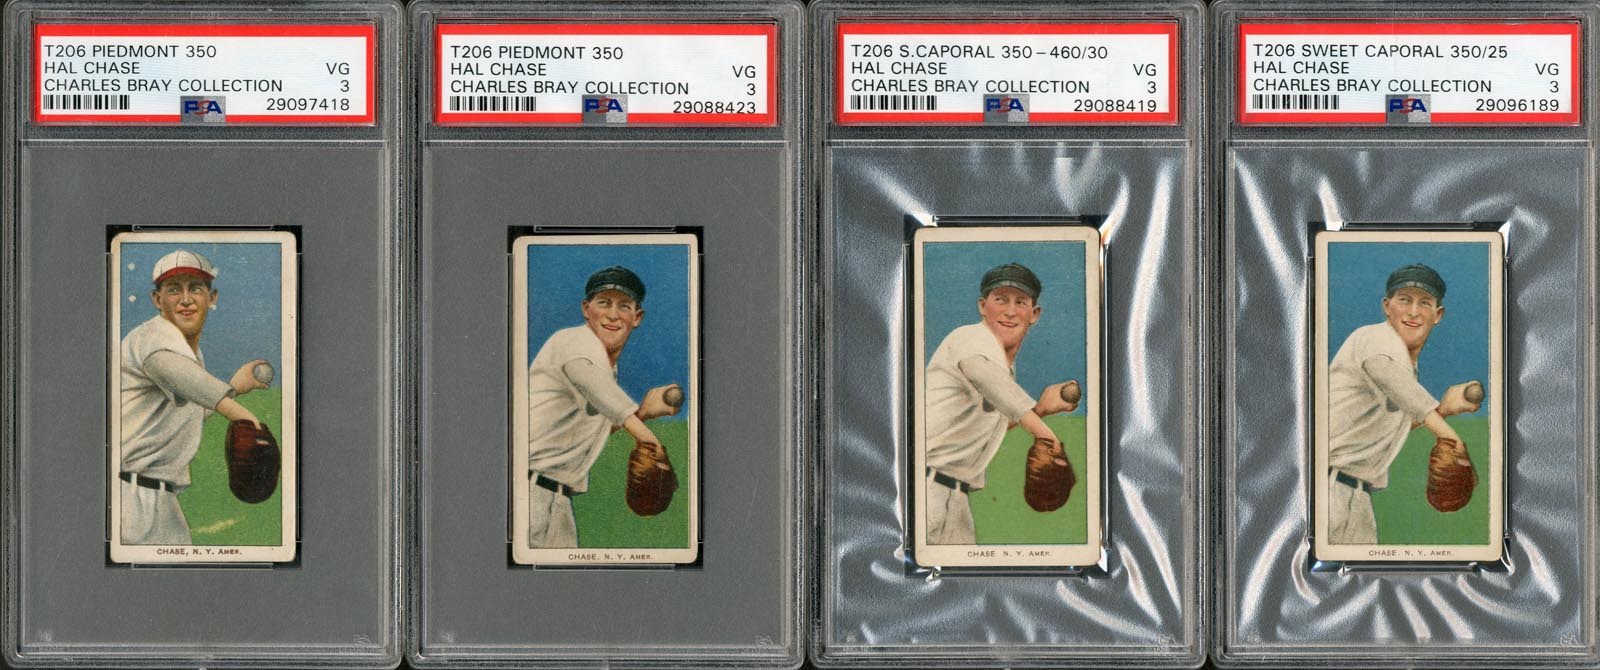 - T206 Hal Chase Collection of 4 From The Charles Bray Collection